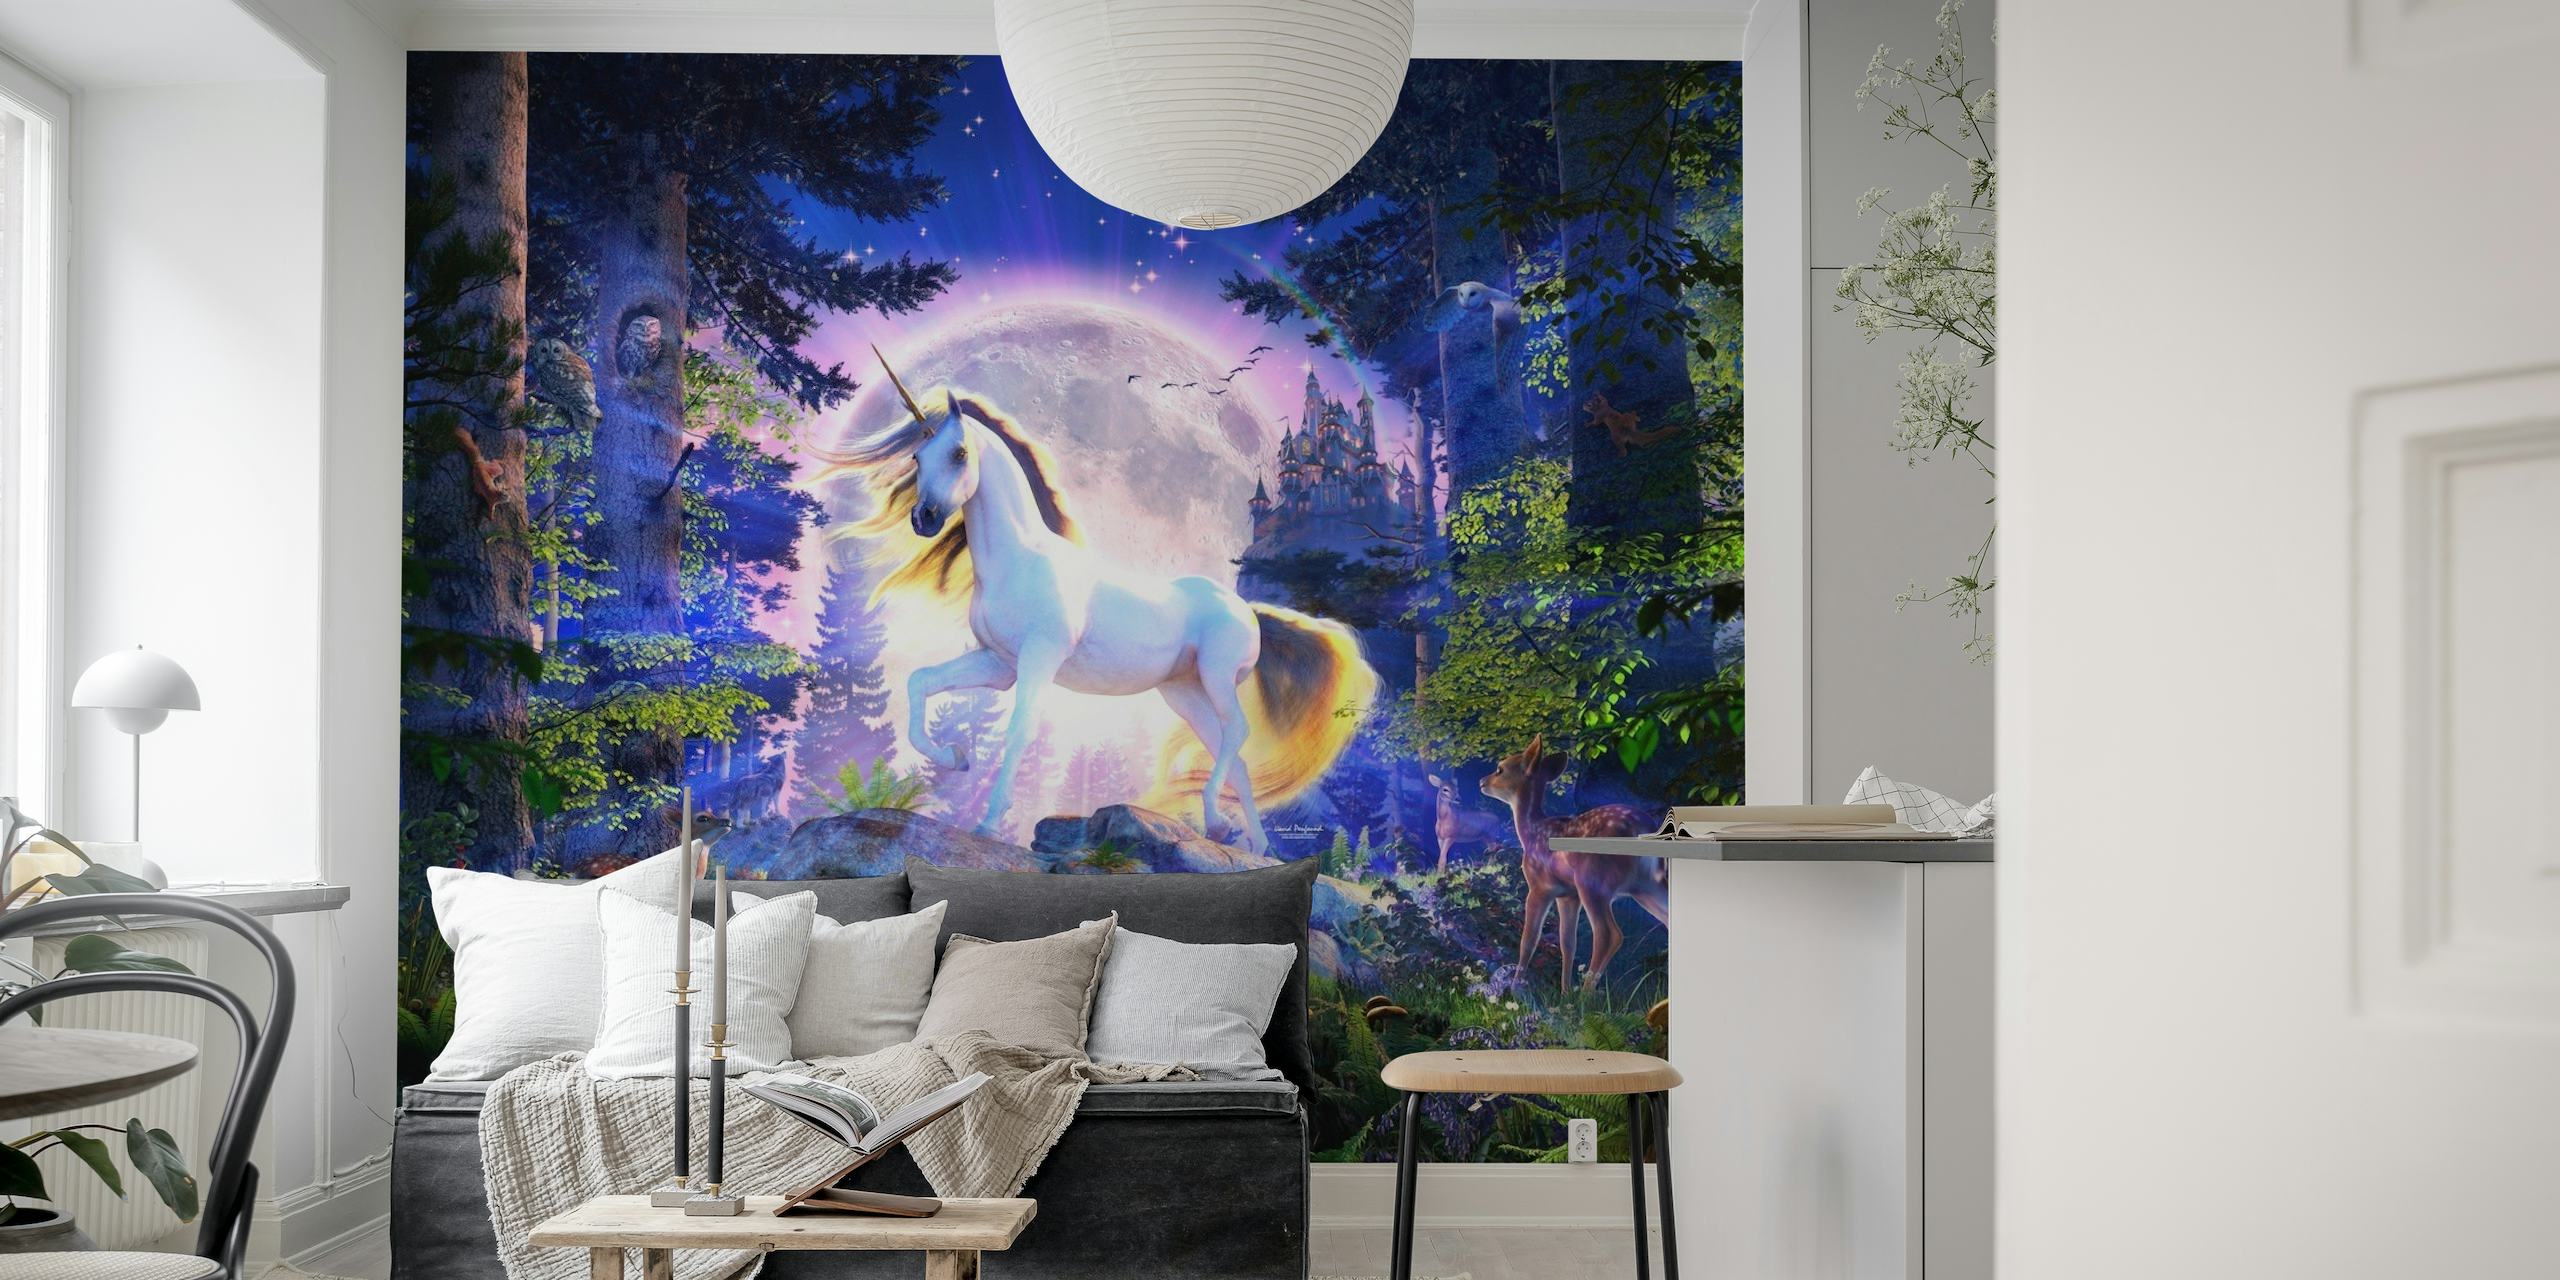 Enchanting moonlit forest scene with a majestic unicorn wall mural